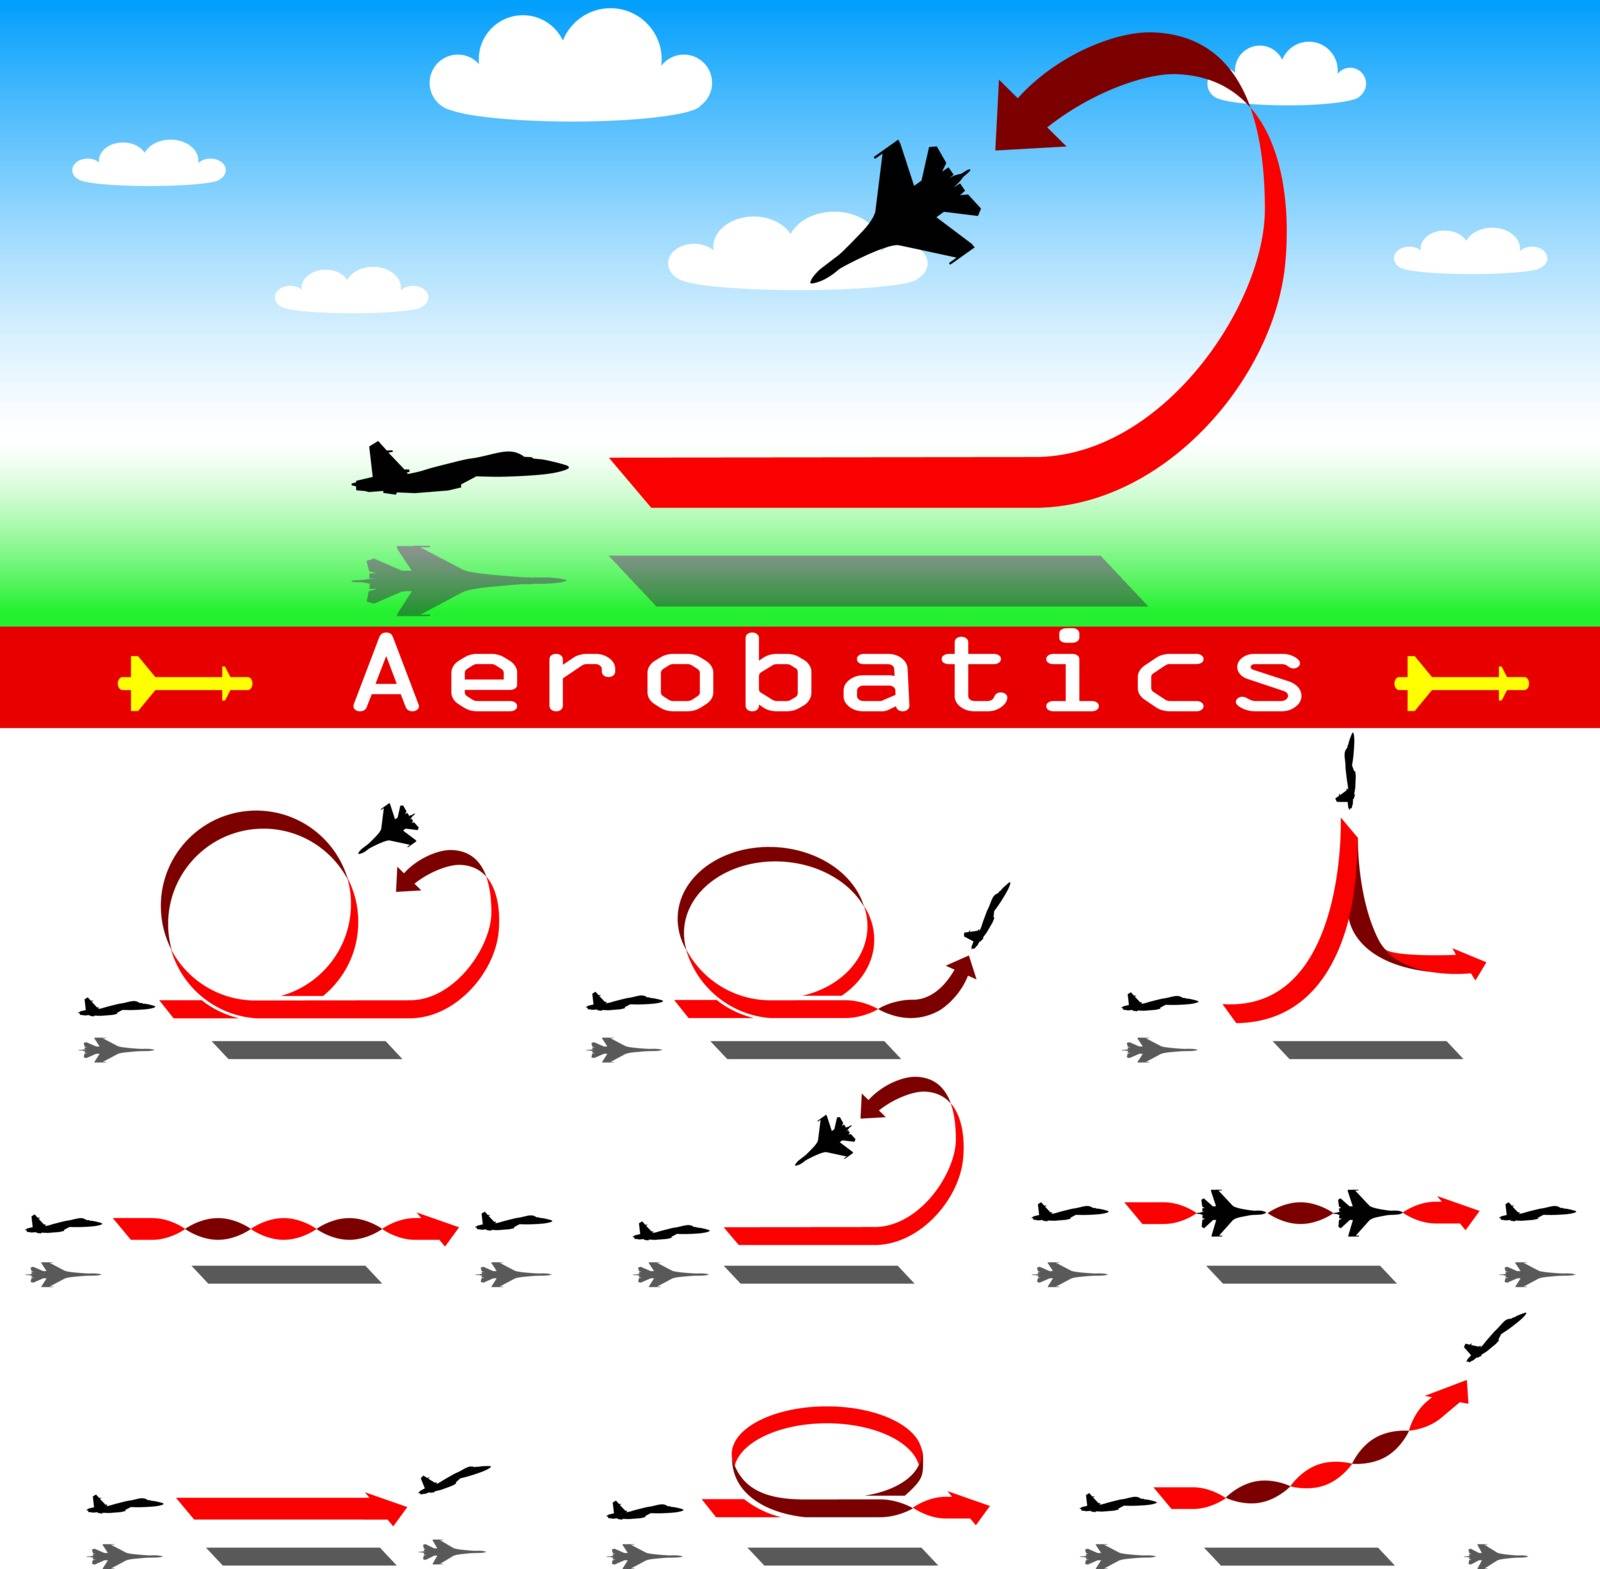 Aerobatics airplane on blue sky background. Vector illustration. by aarrows